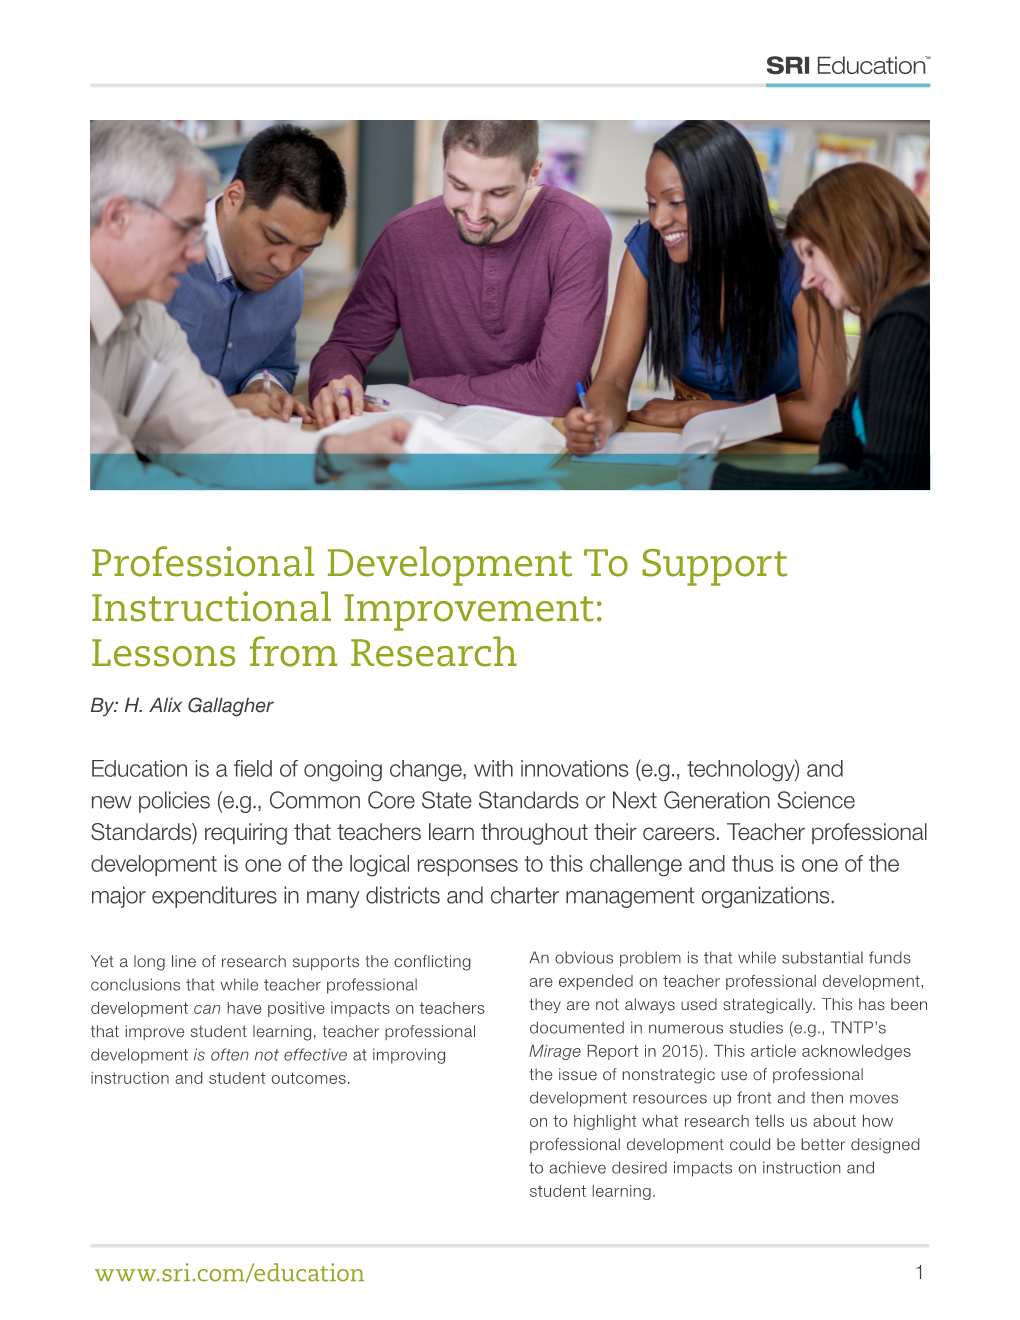 Professional Development to Support Instructional Improvement: Lessons from Research